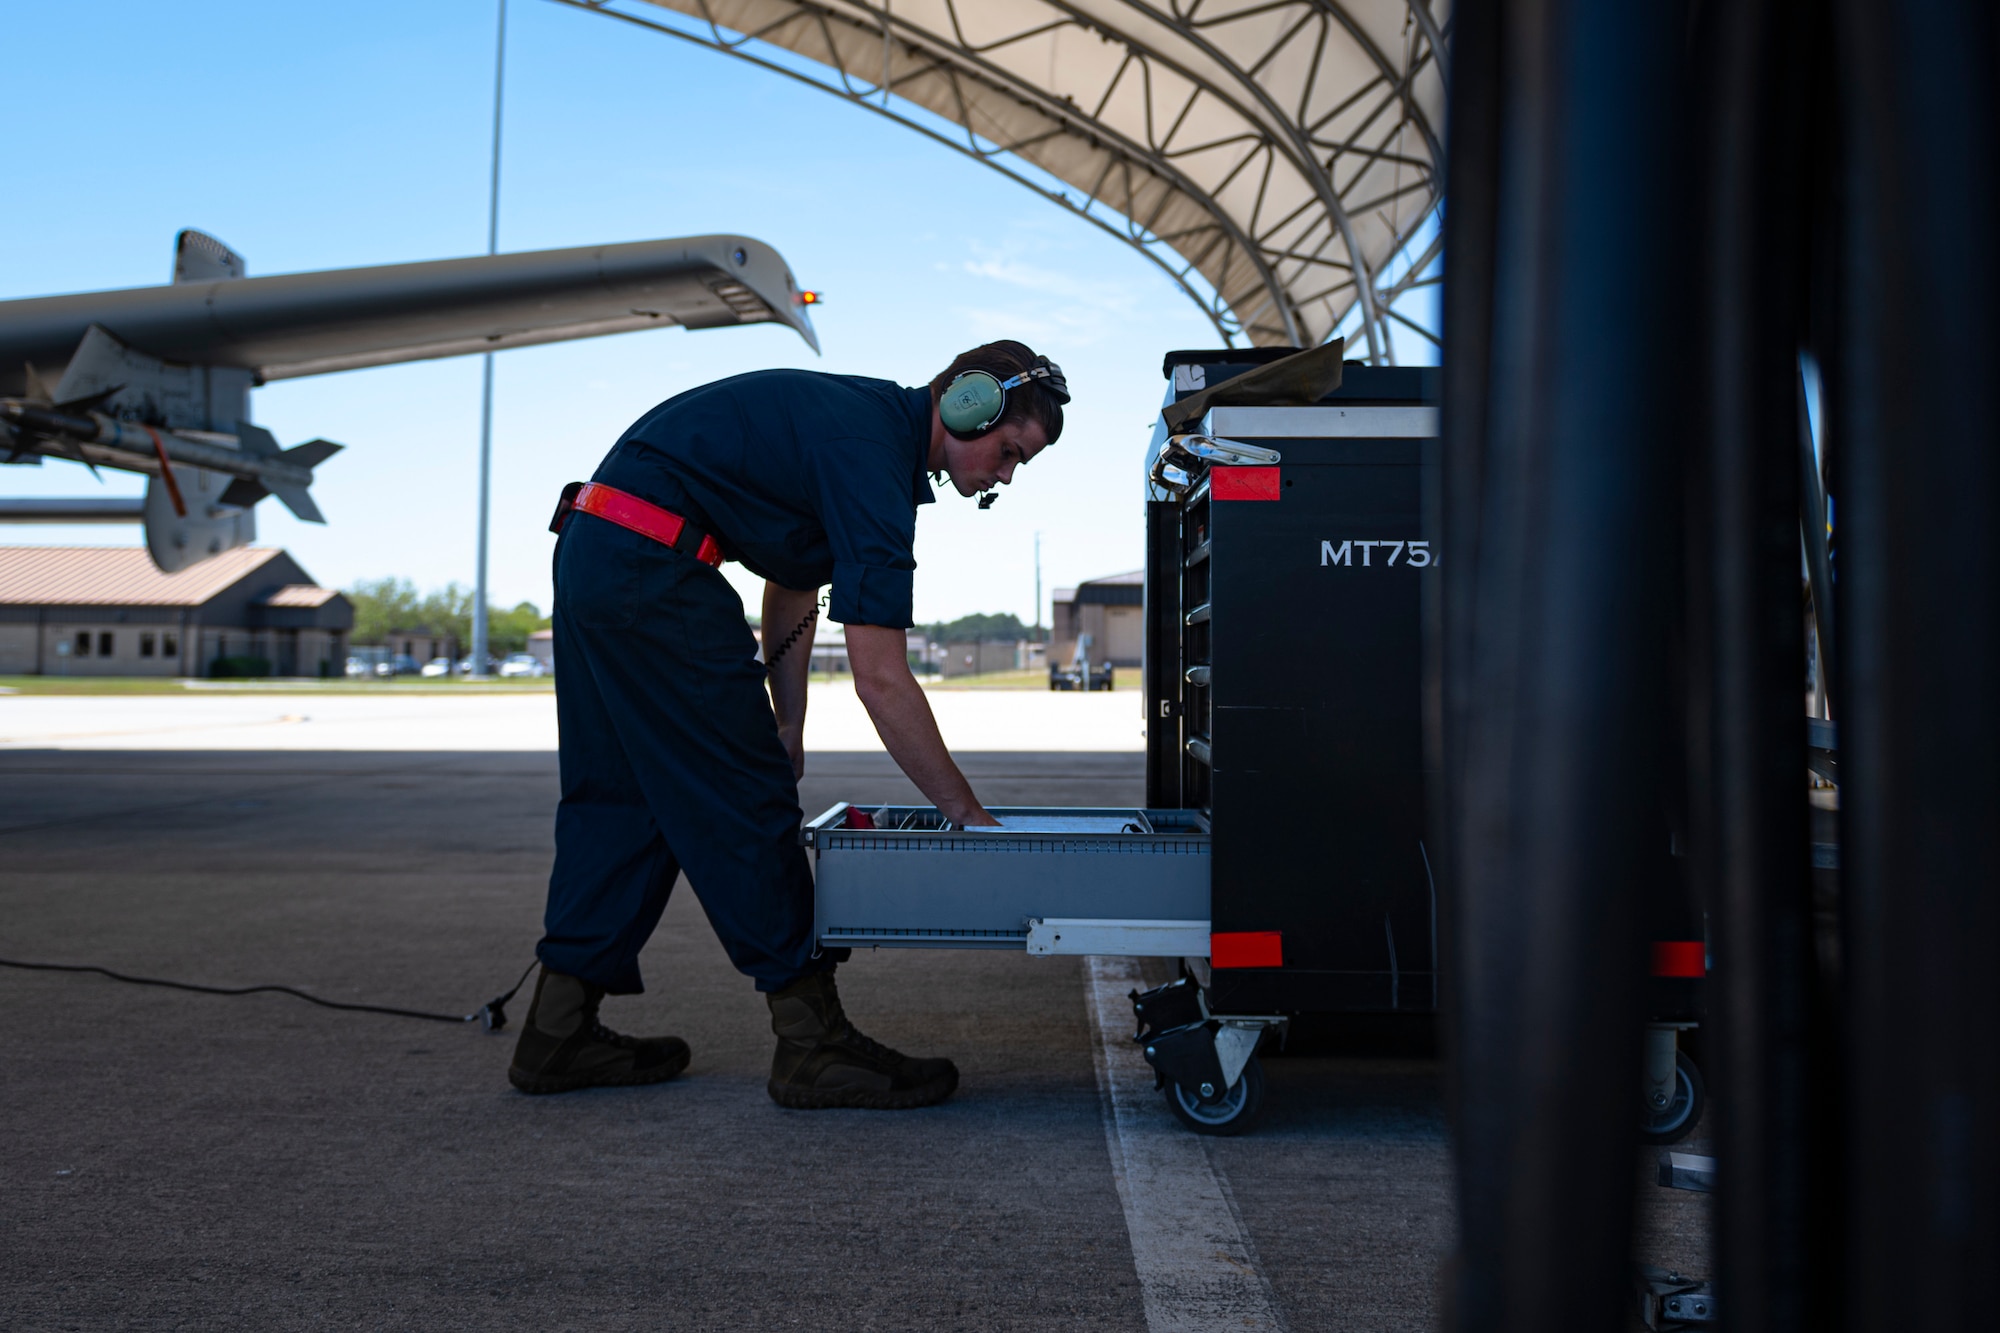 A photo of an Airman gathering tools from a toolbox